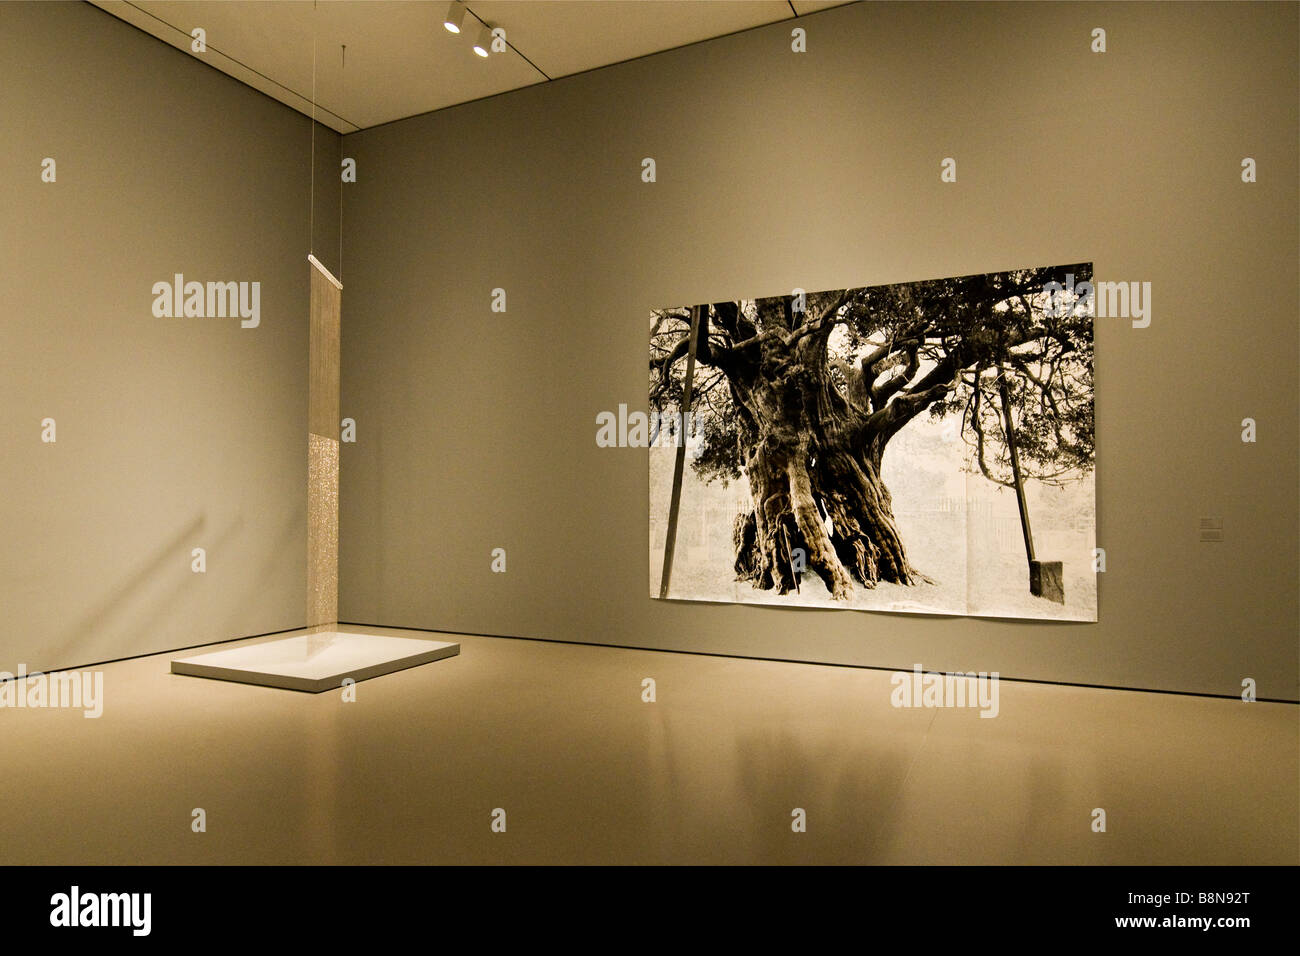 A photographic exhibit of a tree, Museum of modern art Stock Photo